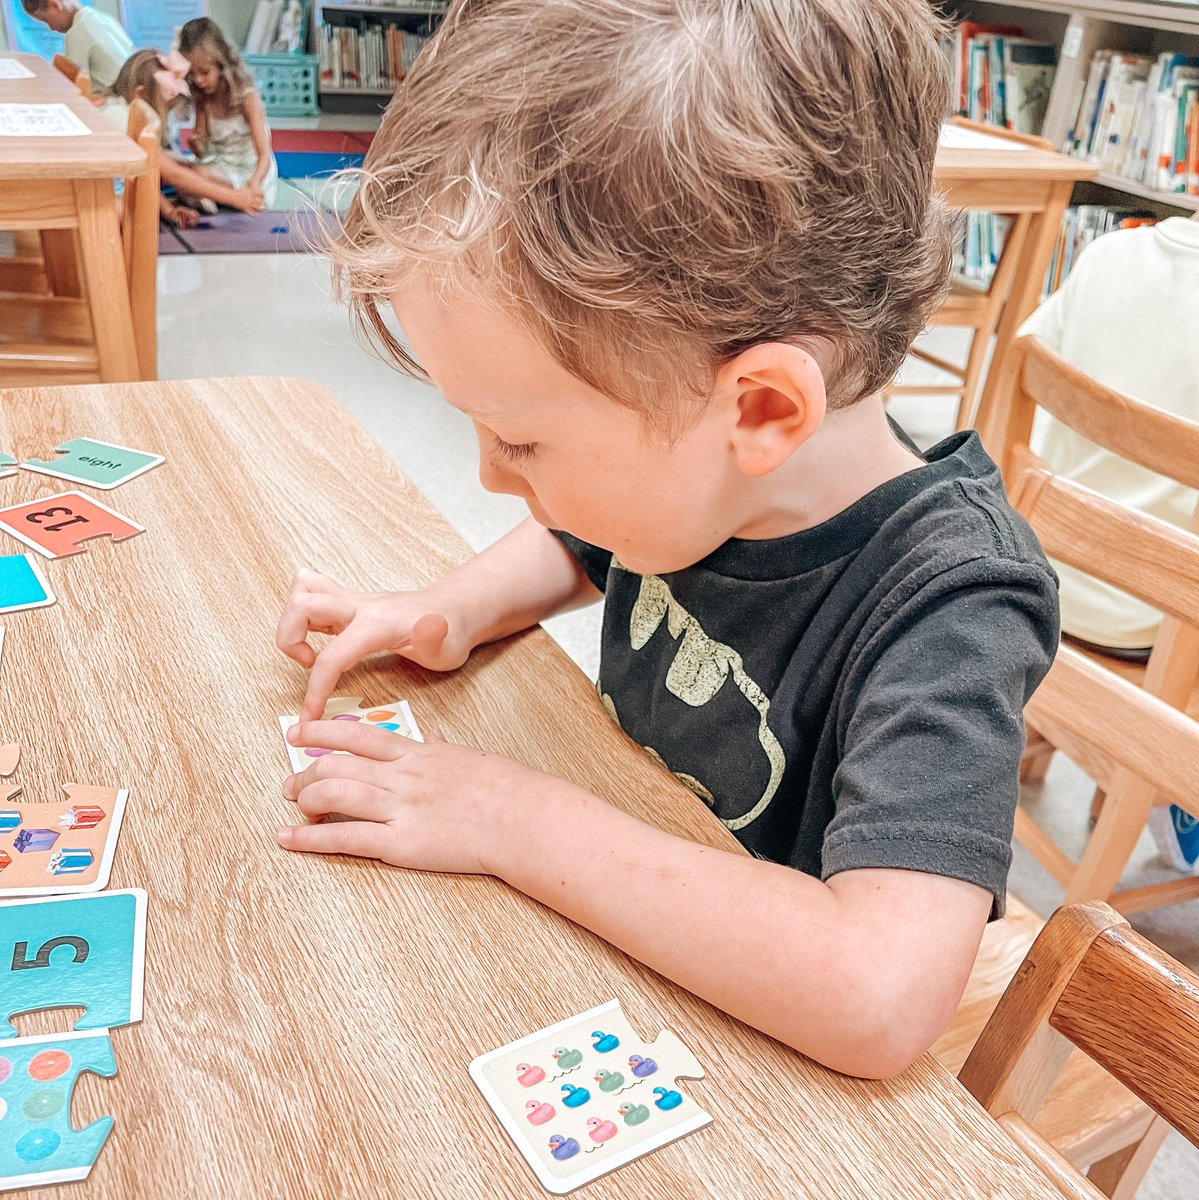 We are having fun and learning in the CCPS Library! These sweet kinders are enjoying BOOKS, working on fine motor skills, practicing math skills, and participating in STEM activities! @cullmanprimary #primarylibrary